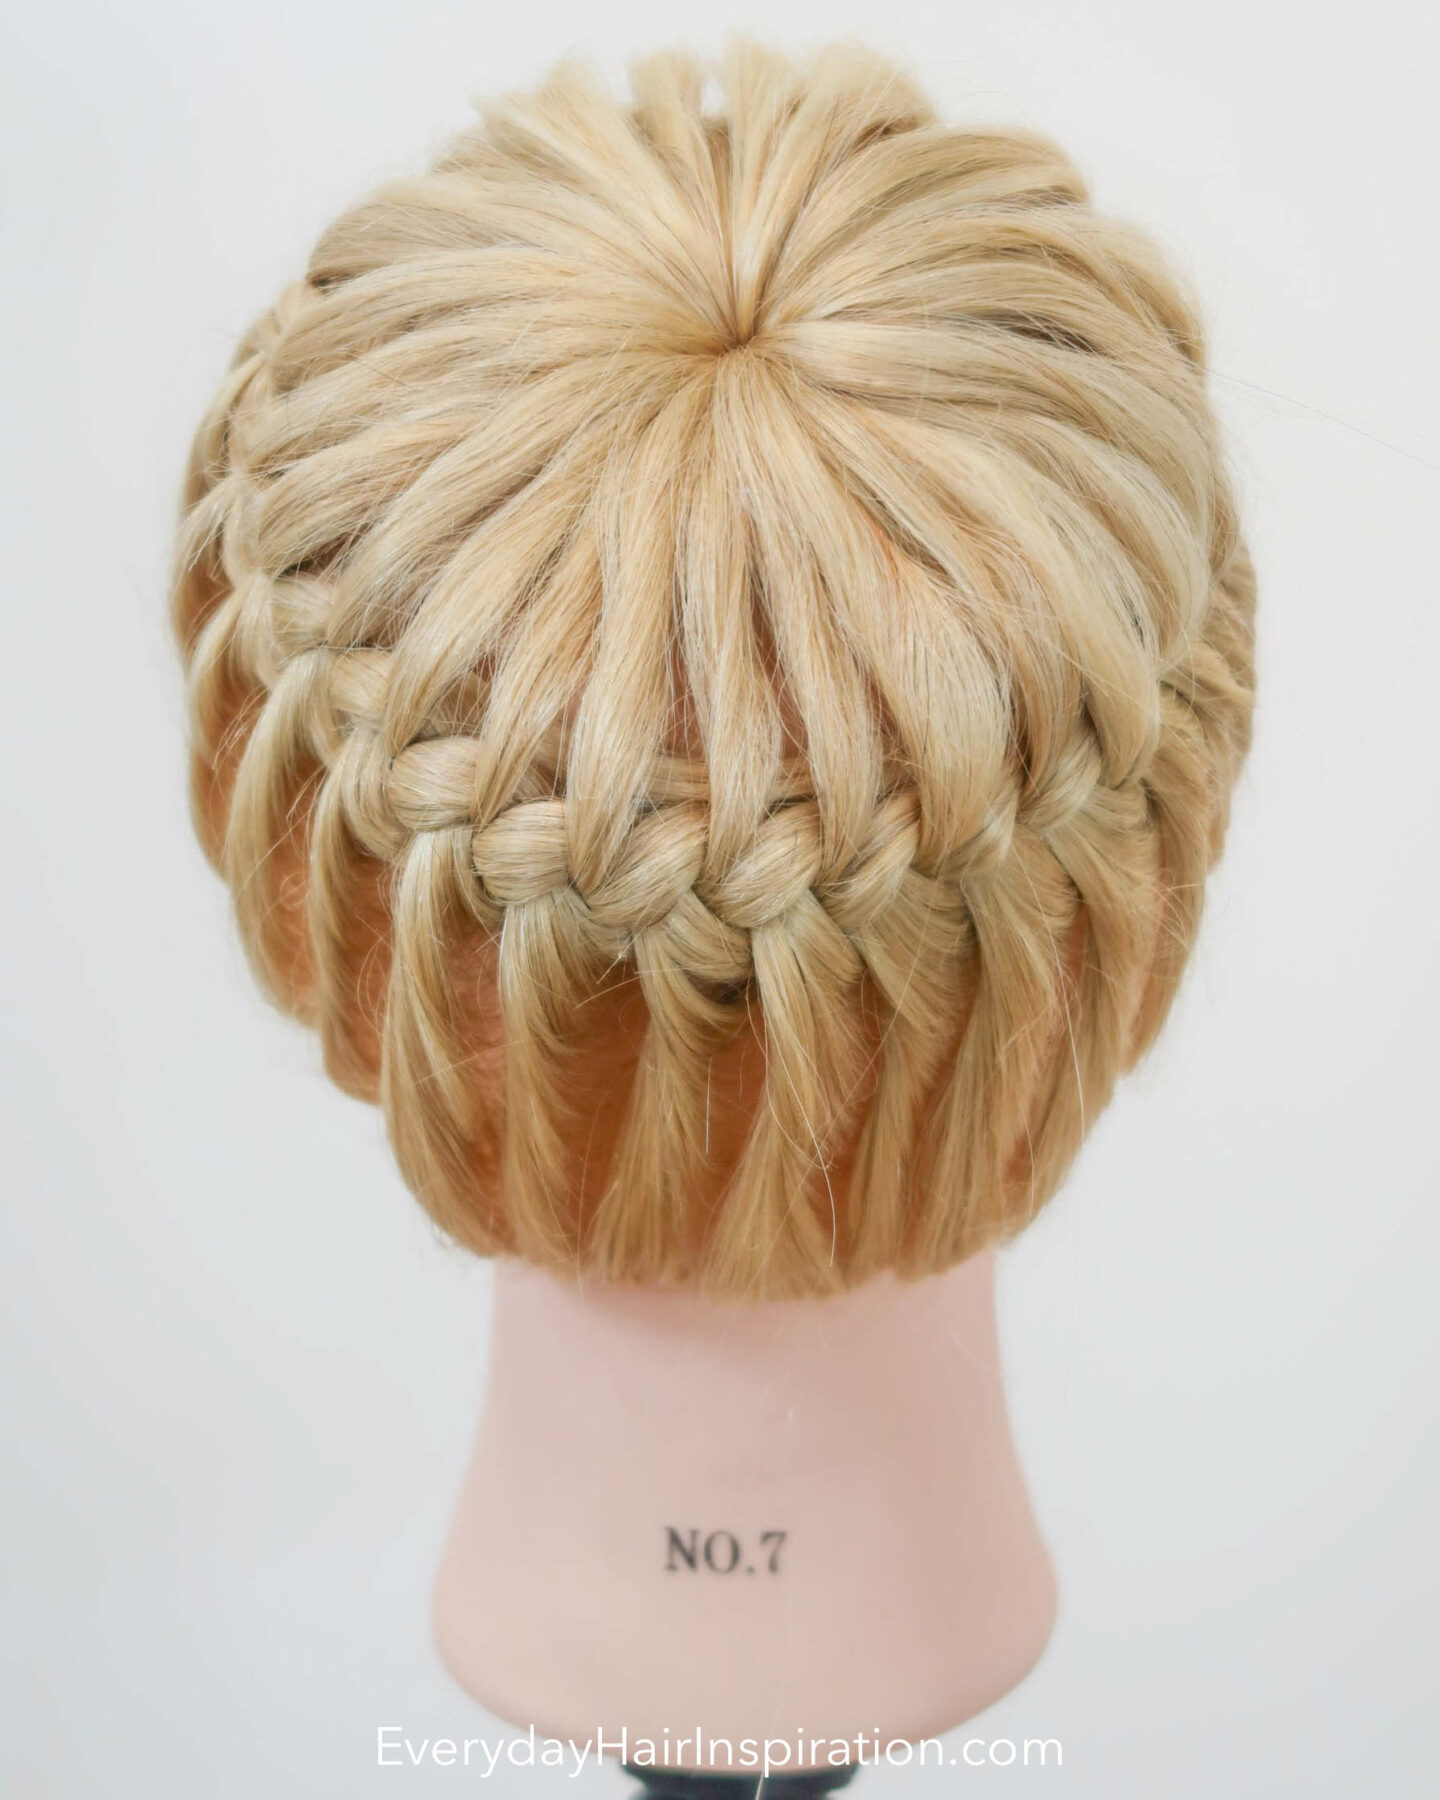 Blonde hairdresser doll seen from the back with a crown braid, braided in the hair.